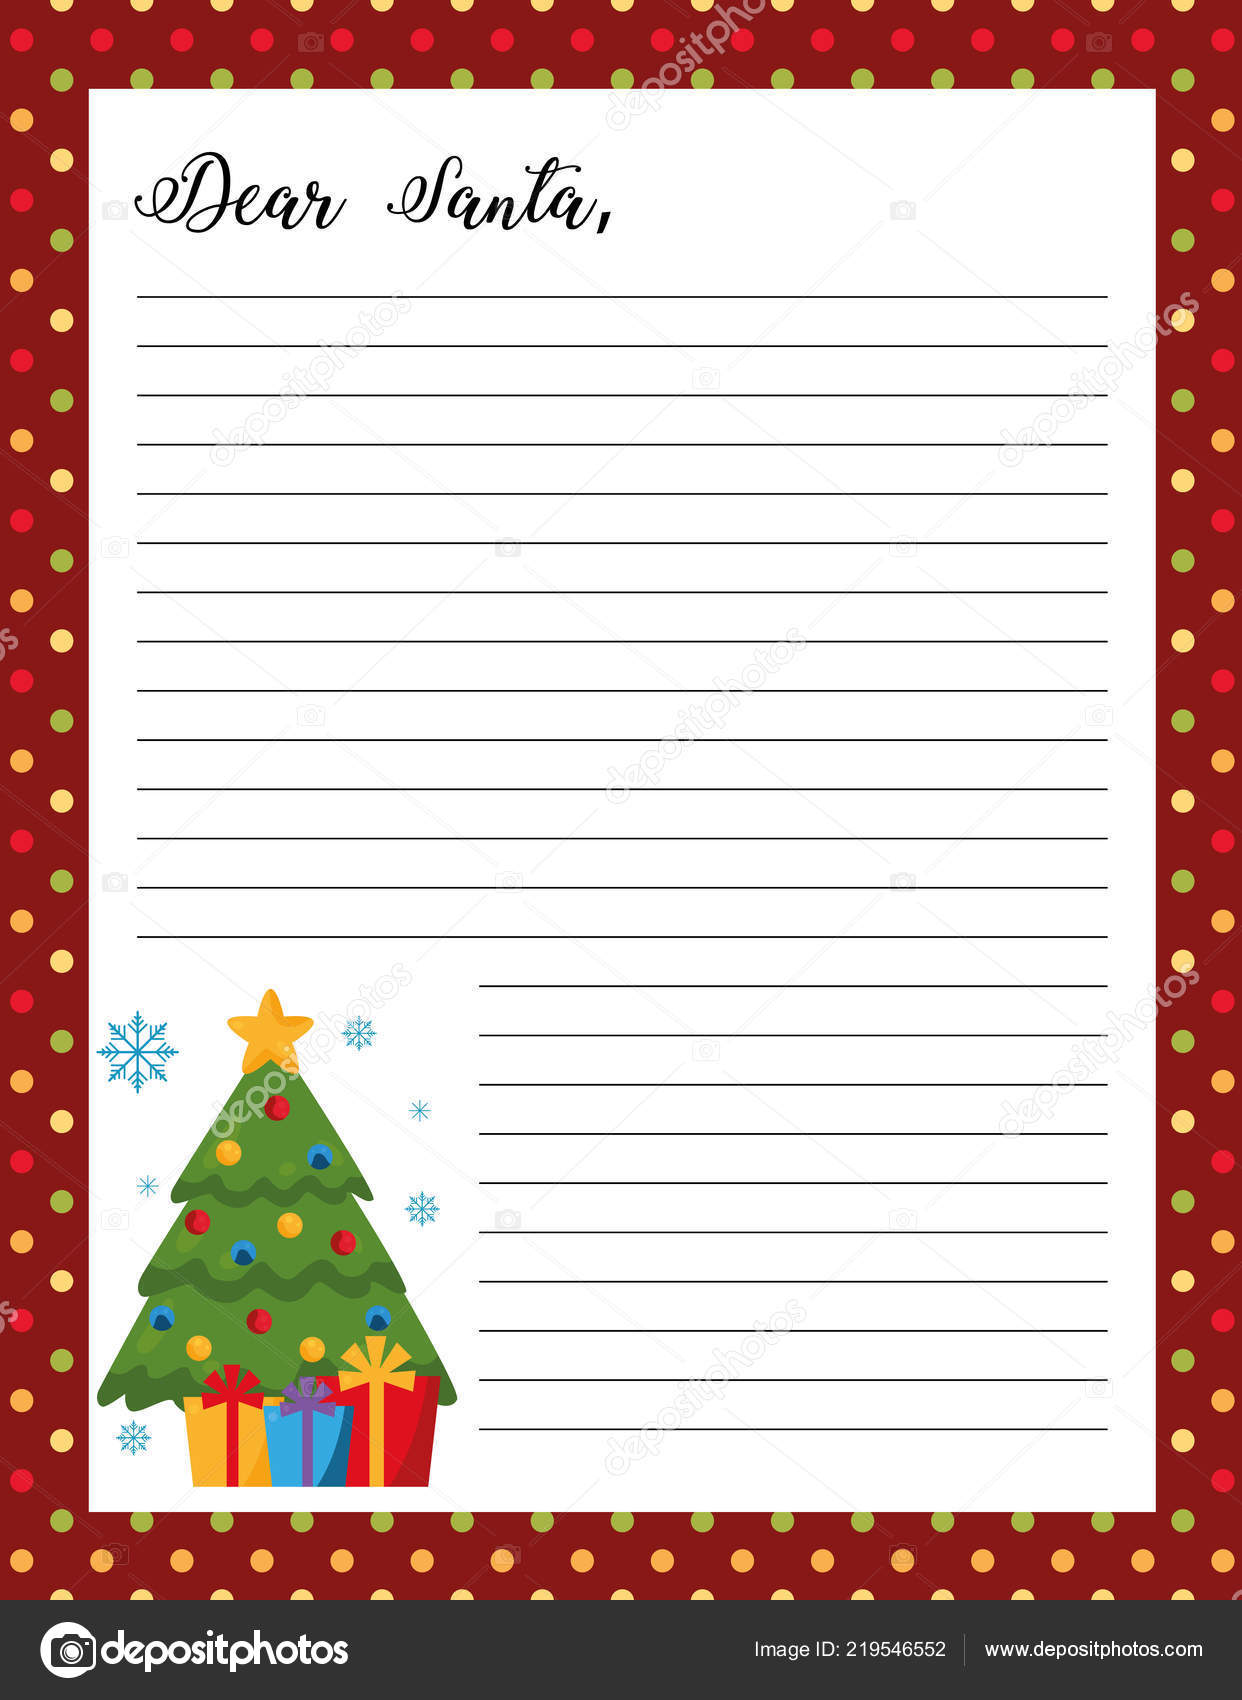 Pictures: christmas tree printable | Letter Santa Template ...